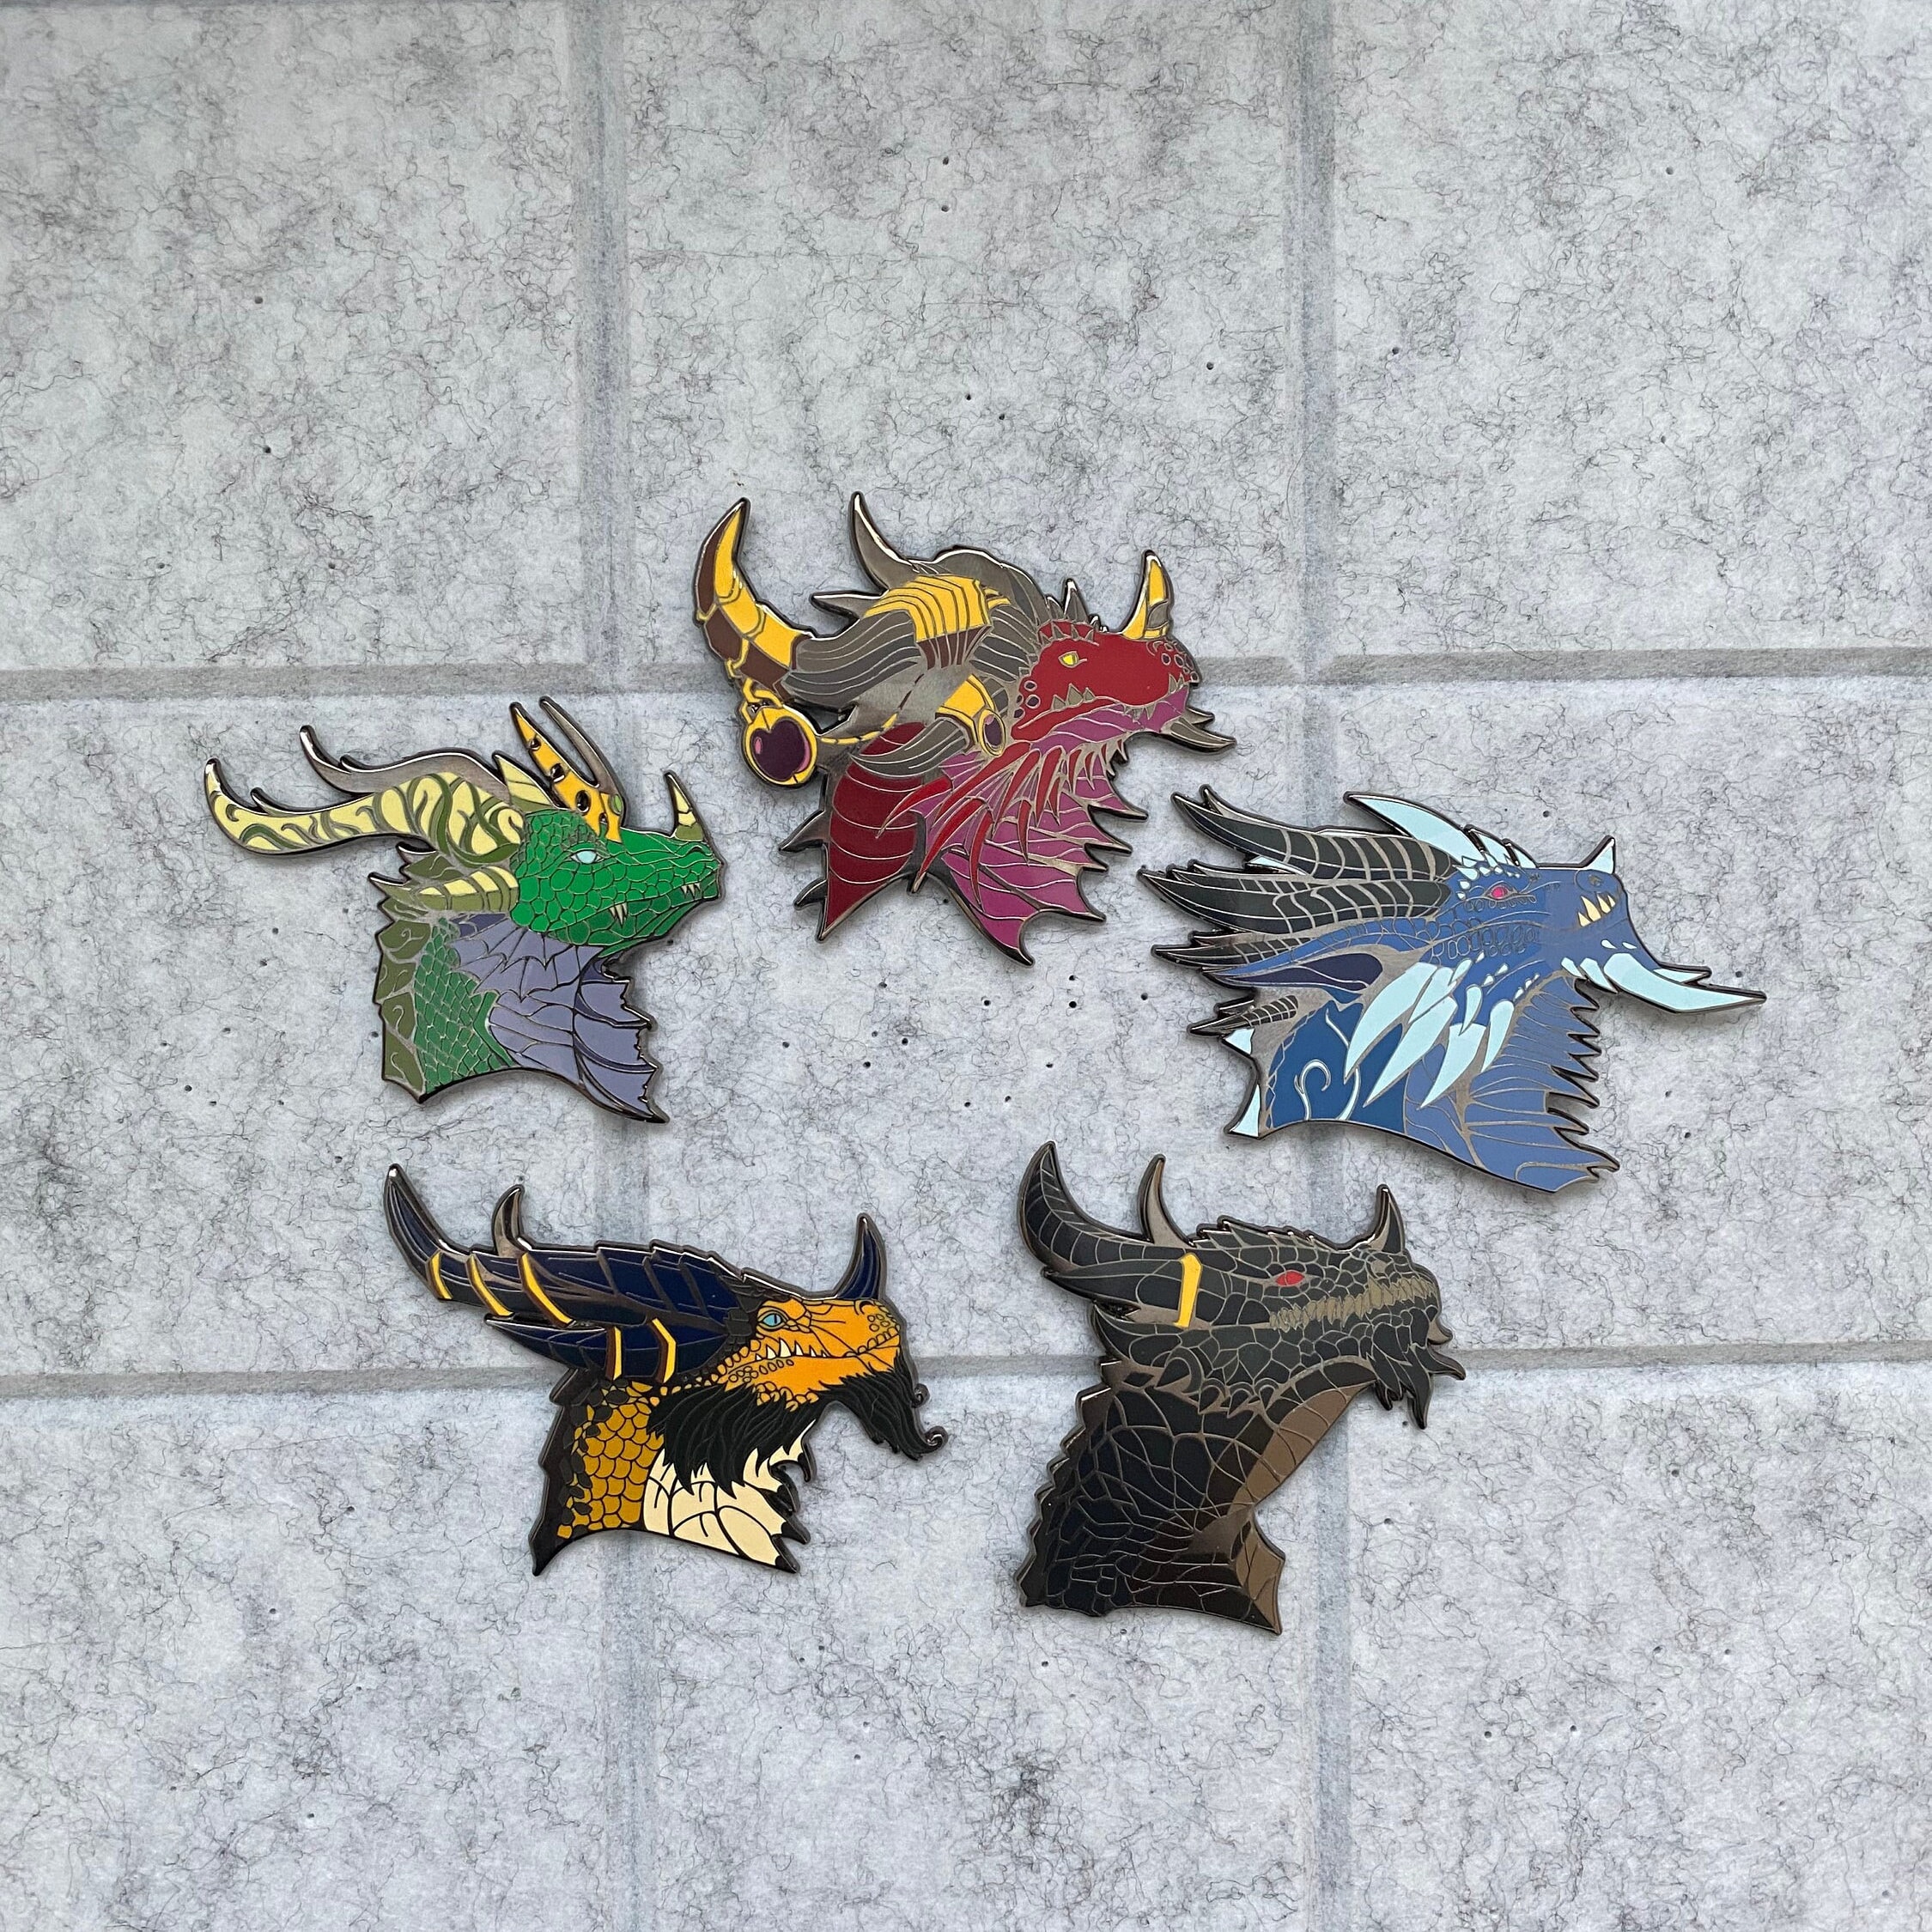 Picked up a cheap wish box to display my pins : r/EnamelPins